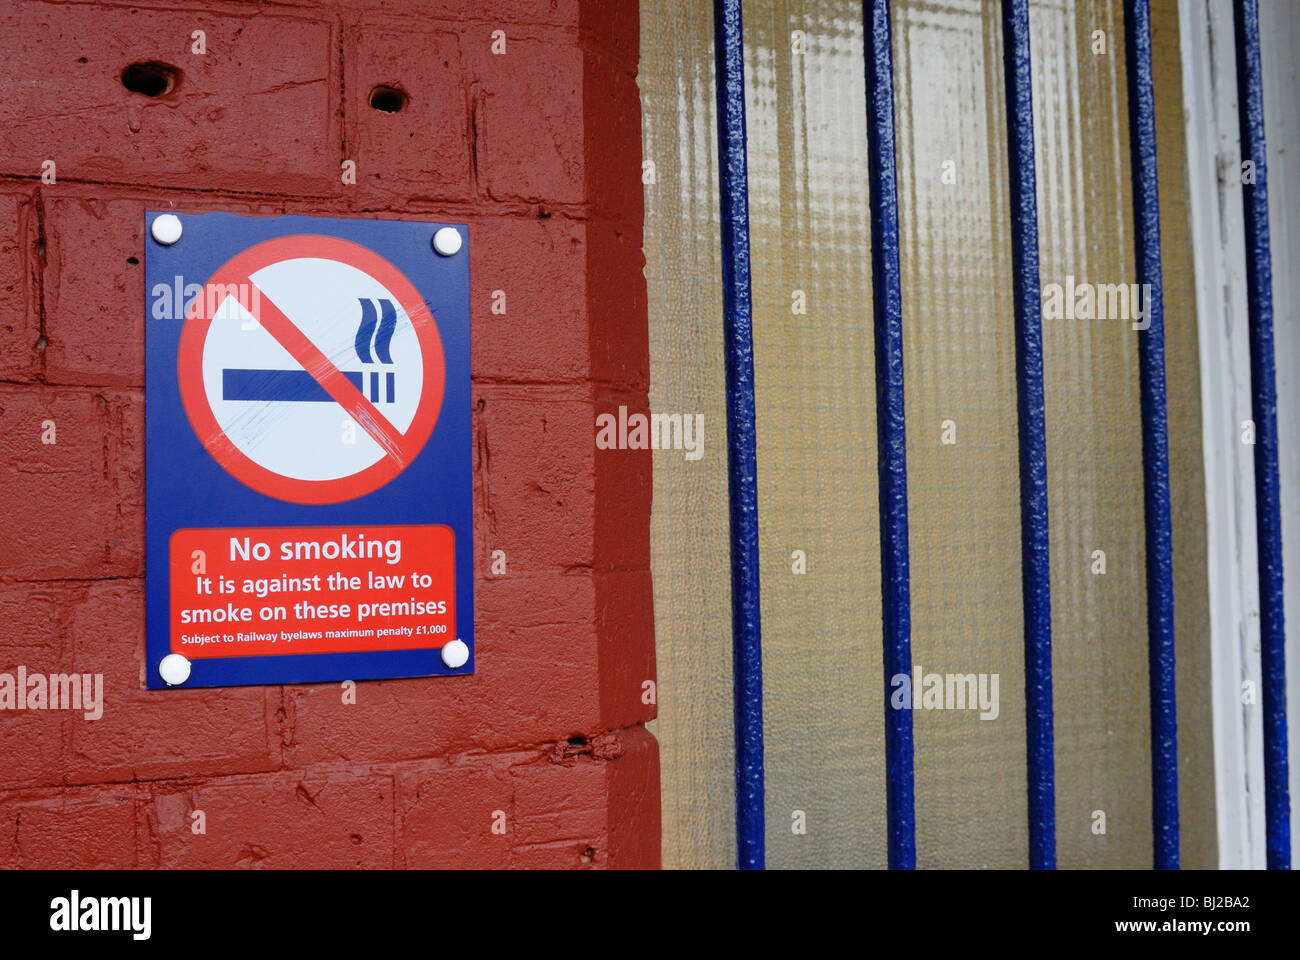 No smoking sign on railway station stating it is illegal. Juxtapositioned next to a barred window Stock Photo